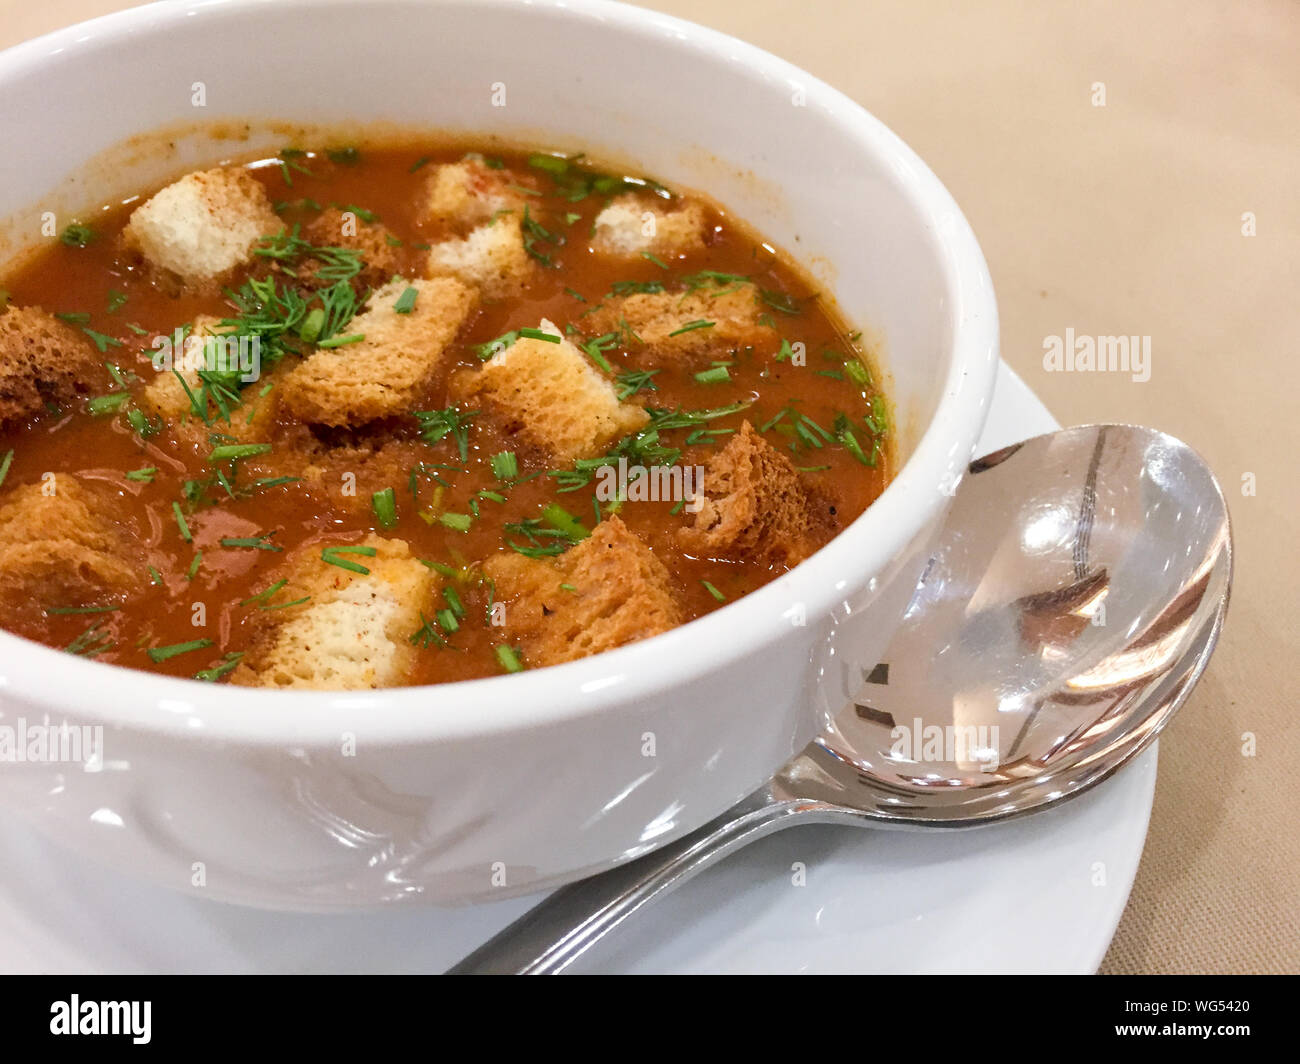 High Angle View Of Soup With Crouton In Bowl On Table Stock Photo